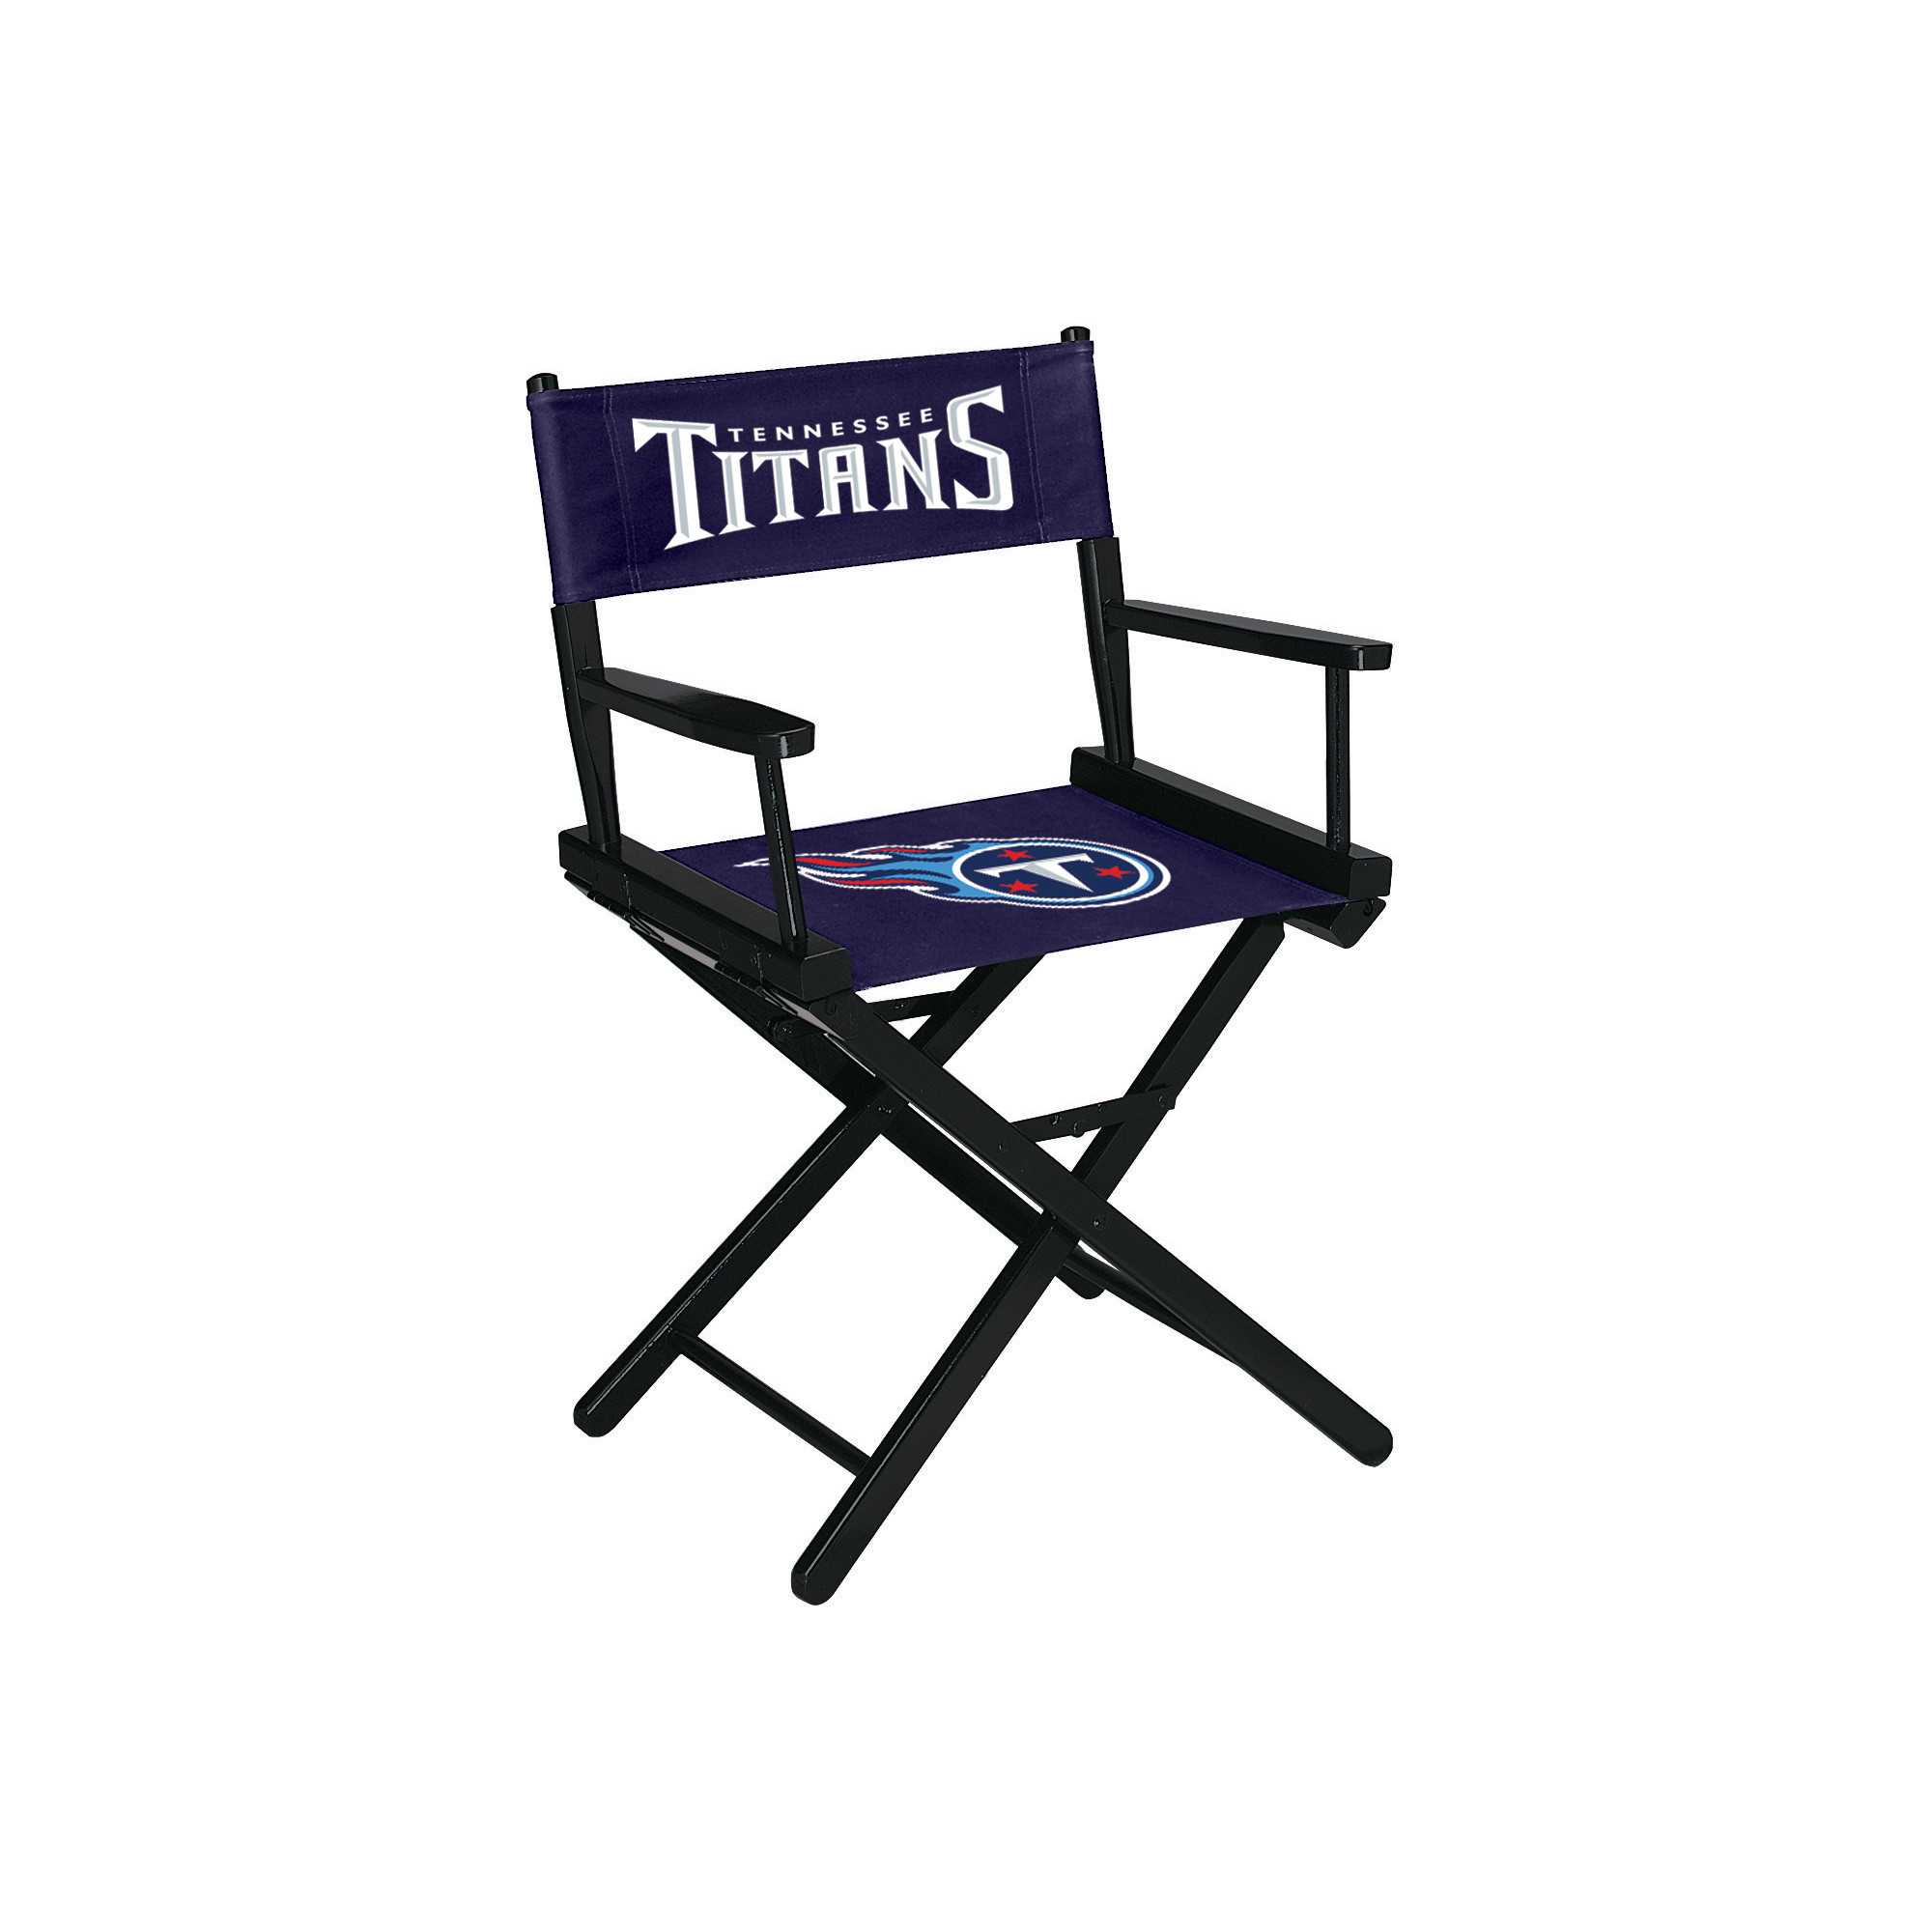 TENNESSEE TITANS TABLE HEIGHT DIRECTORS CHAIR